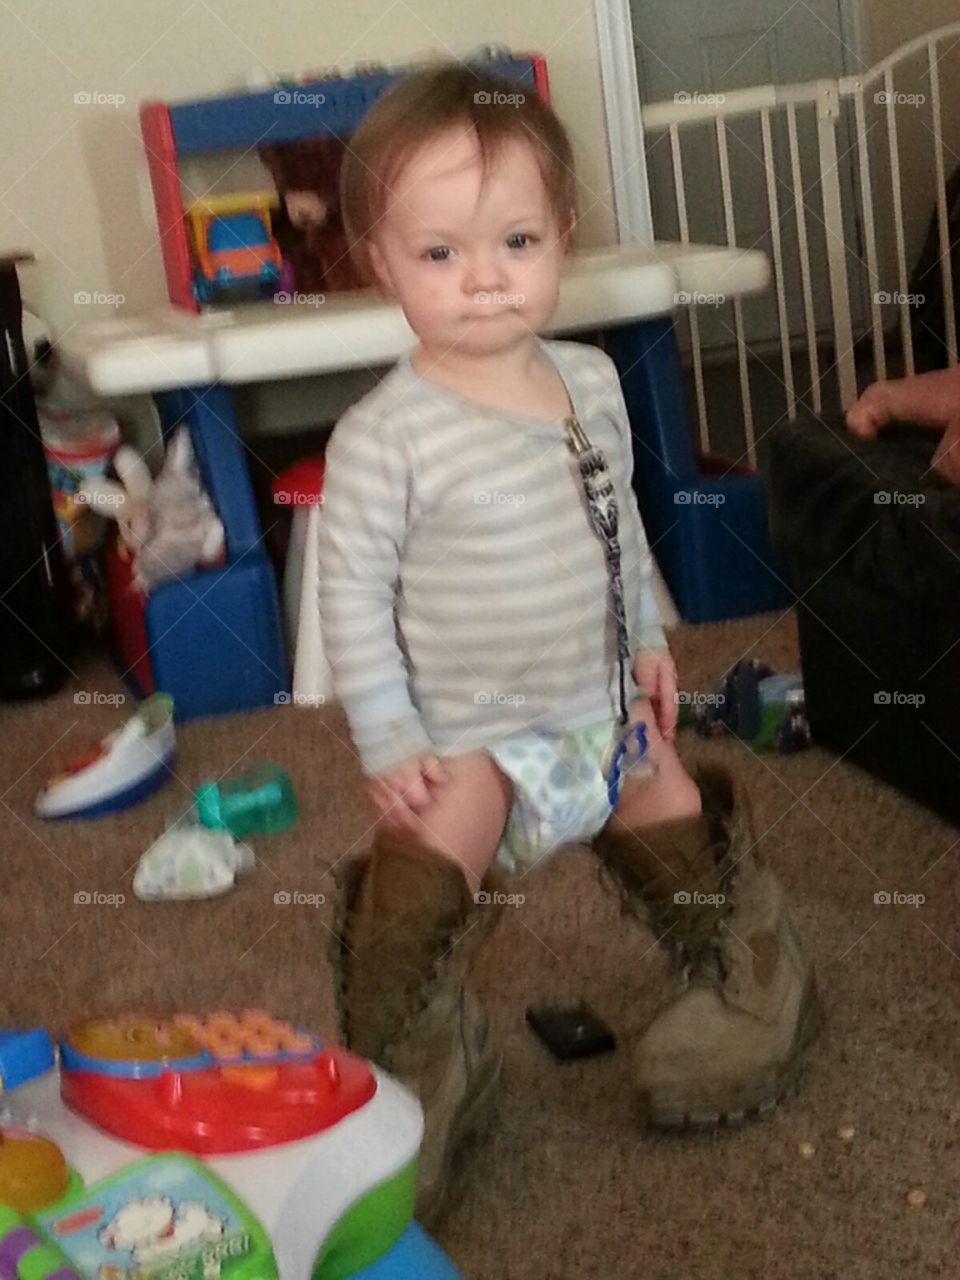 In Daddy's boots. My grandson is wearing his daddy's work boots